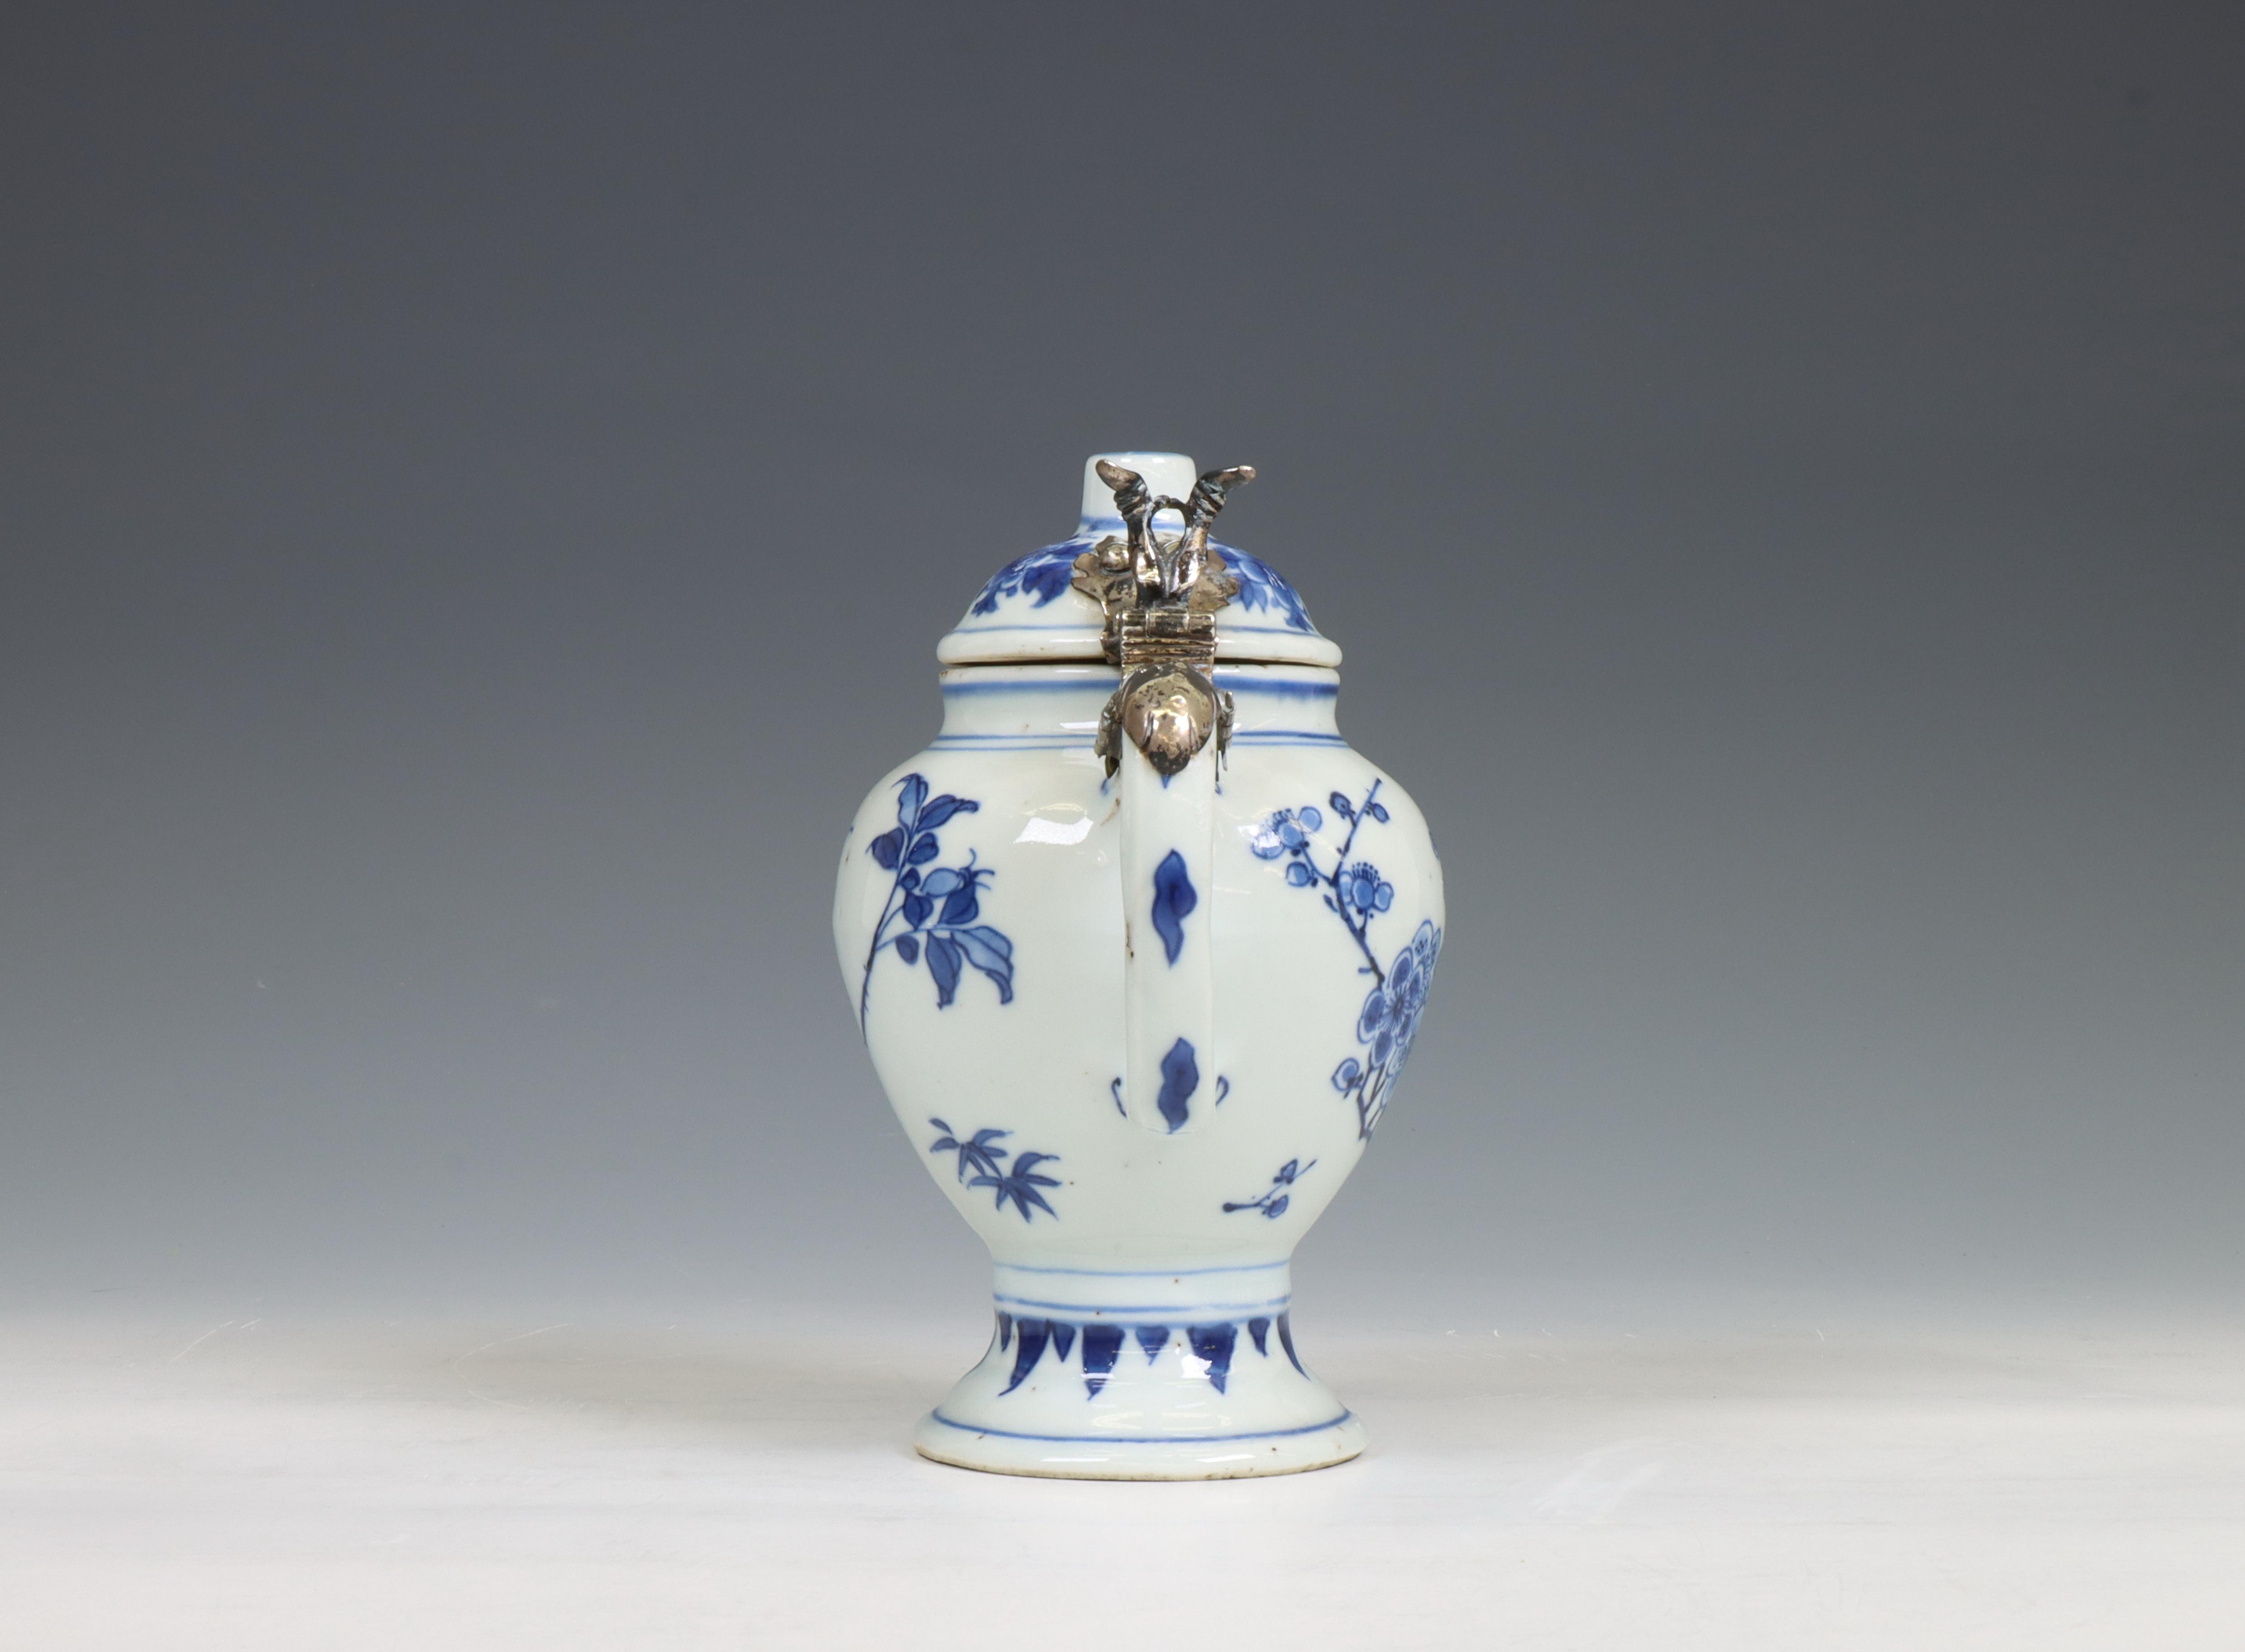 China, a Transitional silver-mounted blue and white mustard-pot and associated cover, mid 17th centu - Image 6 of 6